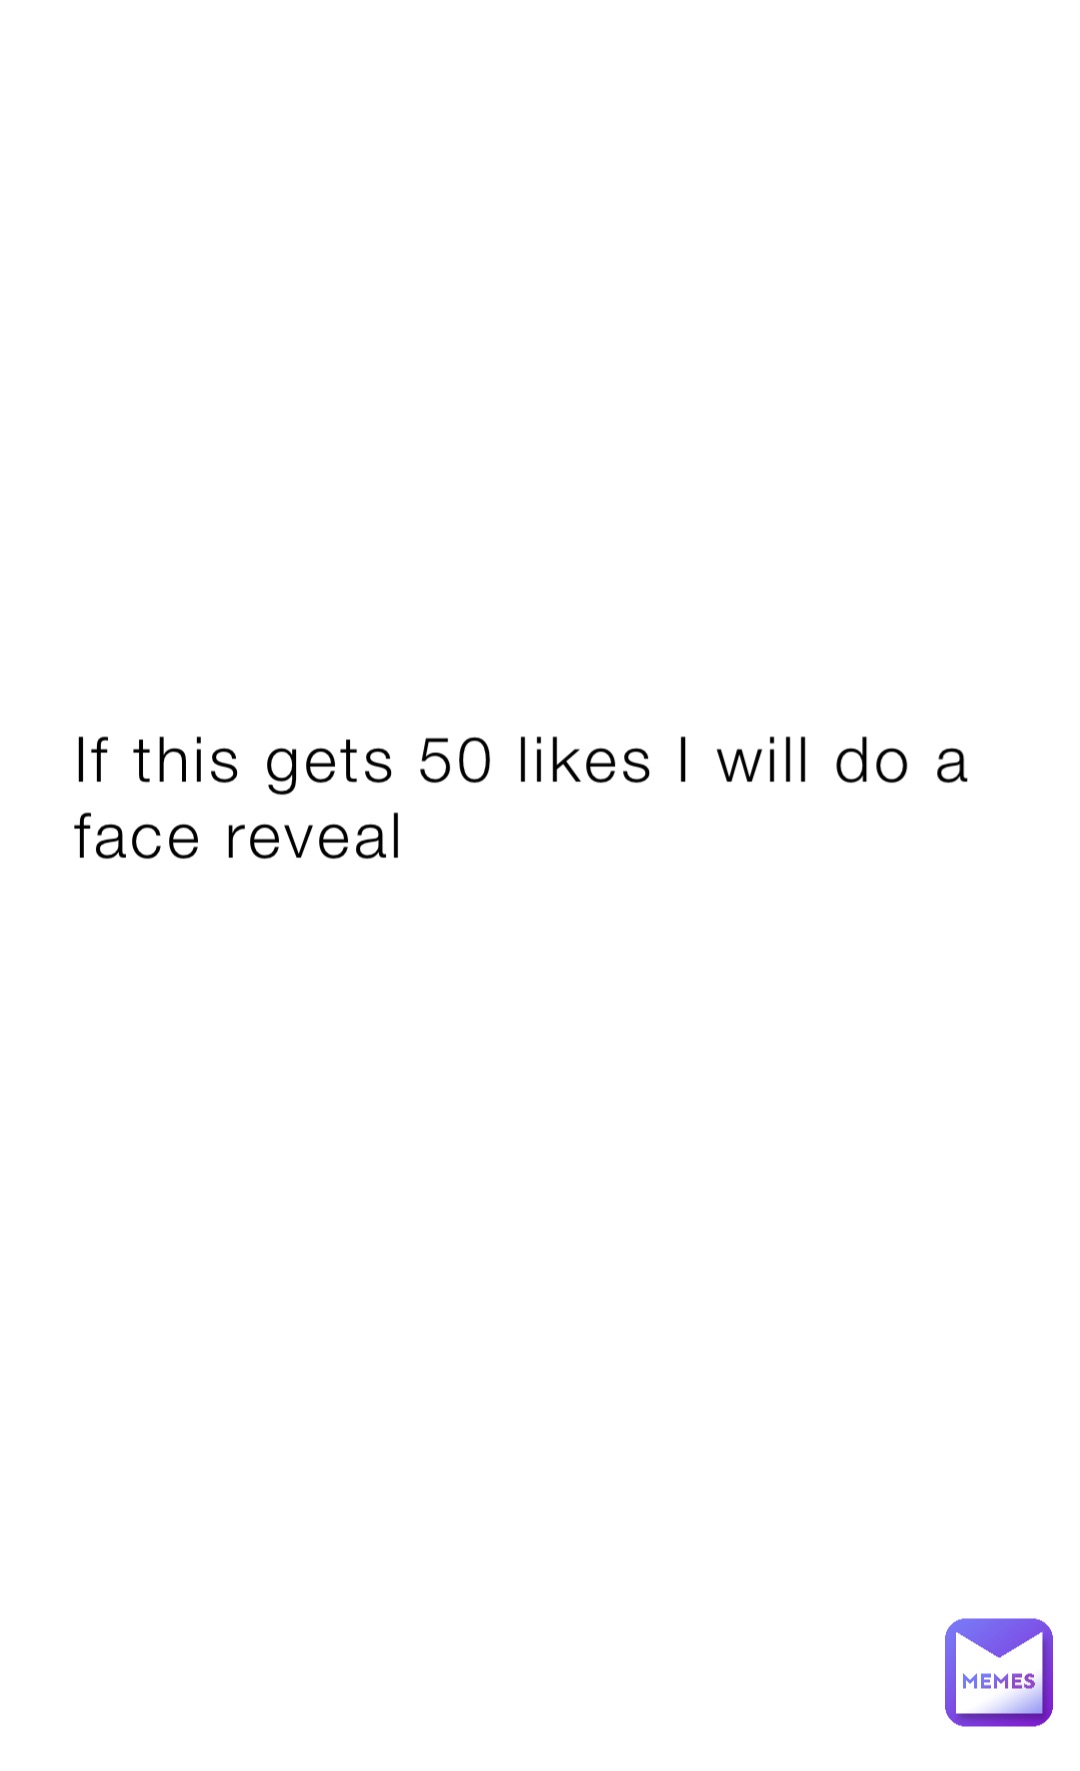 If this gets 50 likes I will do a face reveal